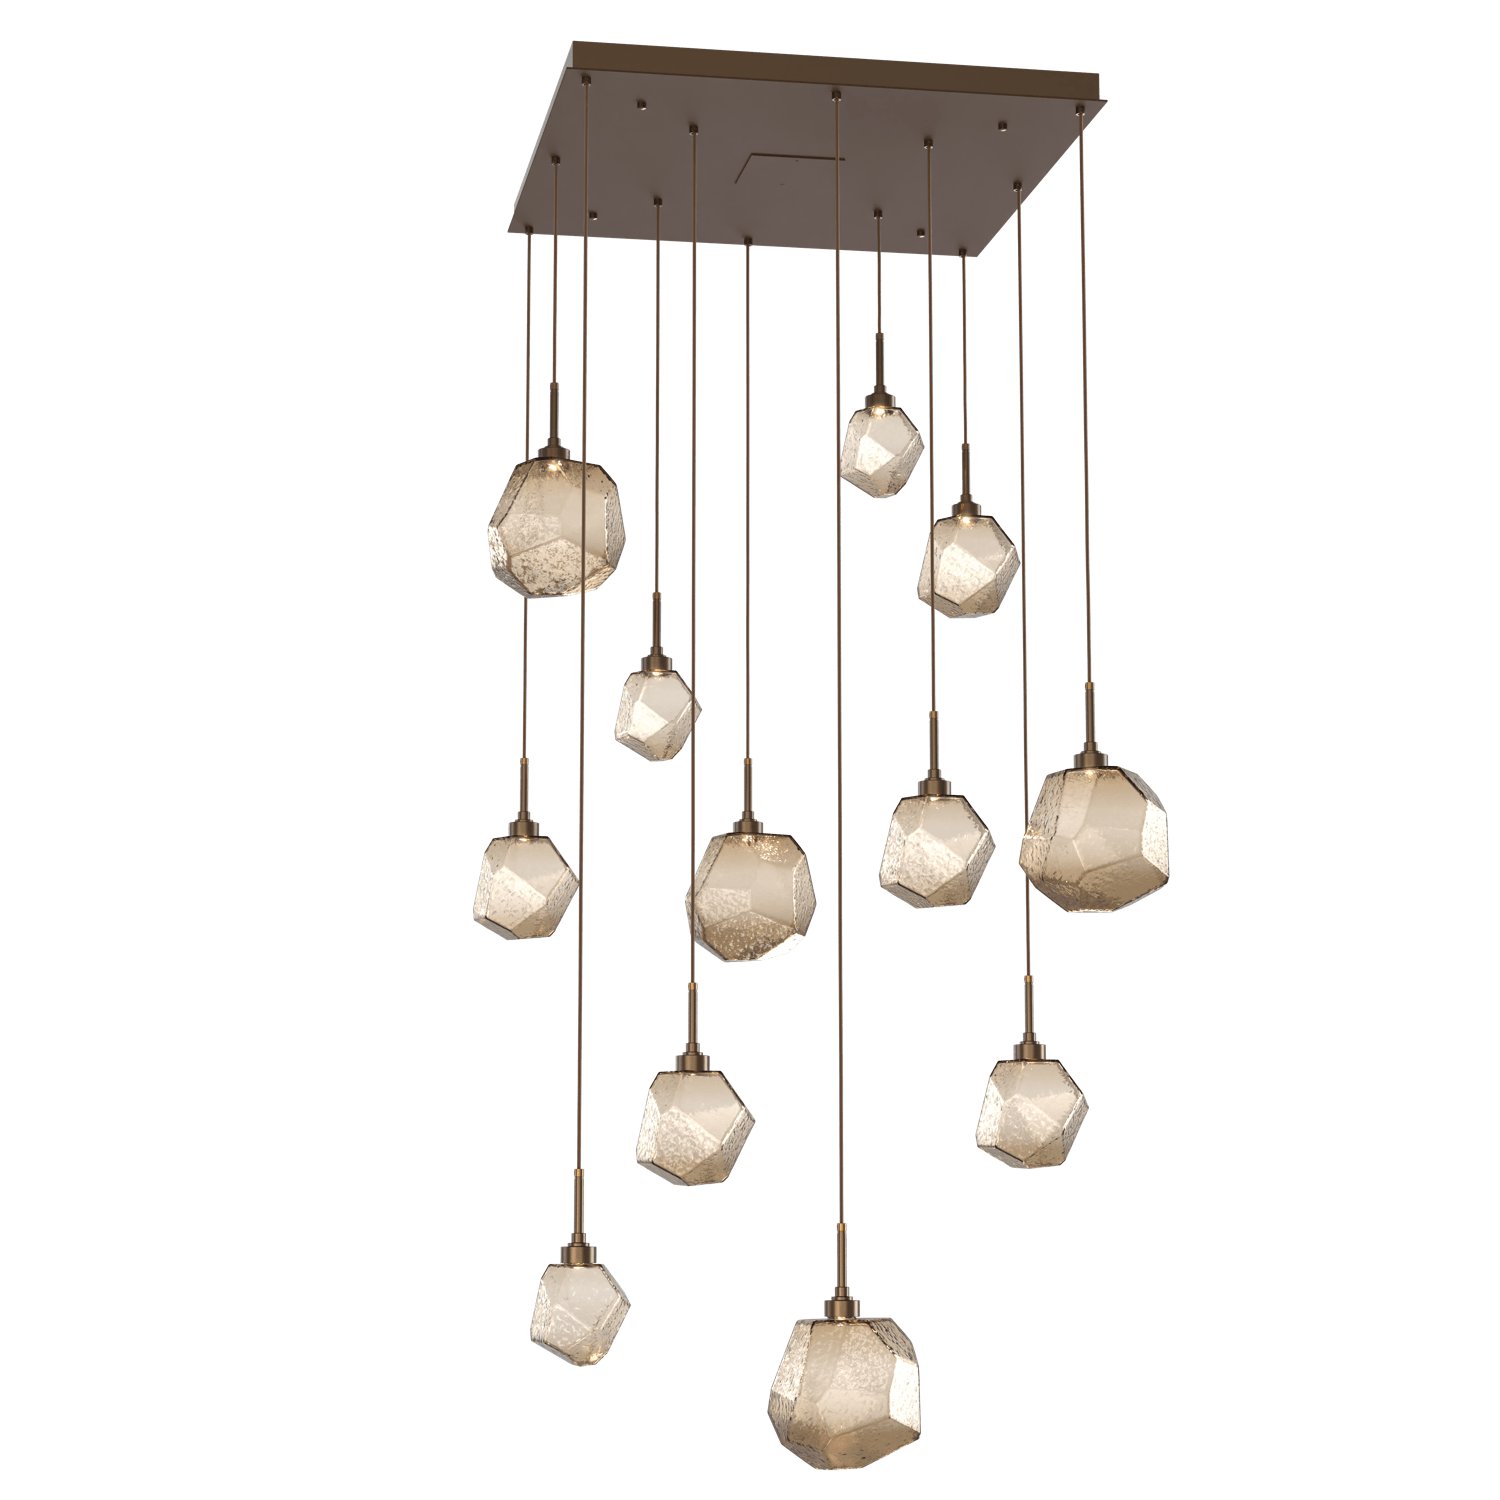 CHB0039-12-FB-B-Hammerton-Studio-Gem-12-light-square-pendant-chandelier-with-flat-bronze-finish-and-bronze-blown-glass-shades-and-LED-lamping